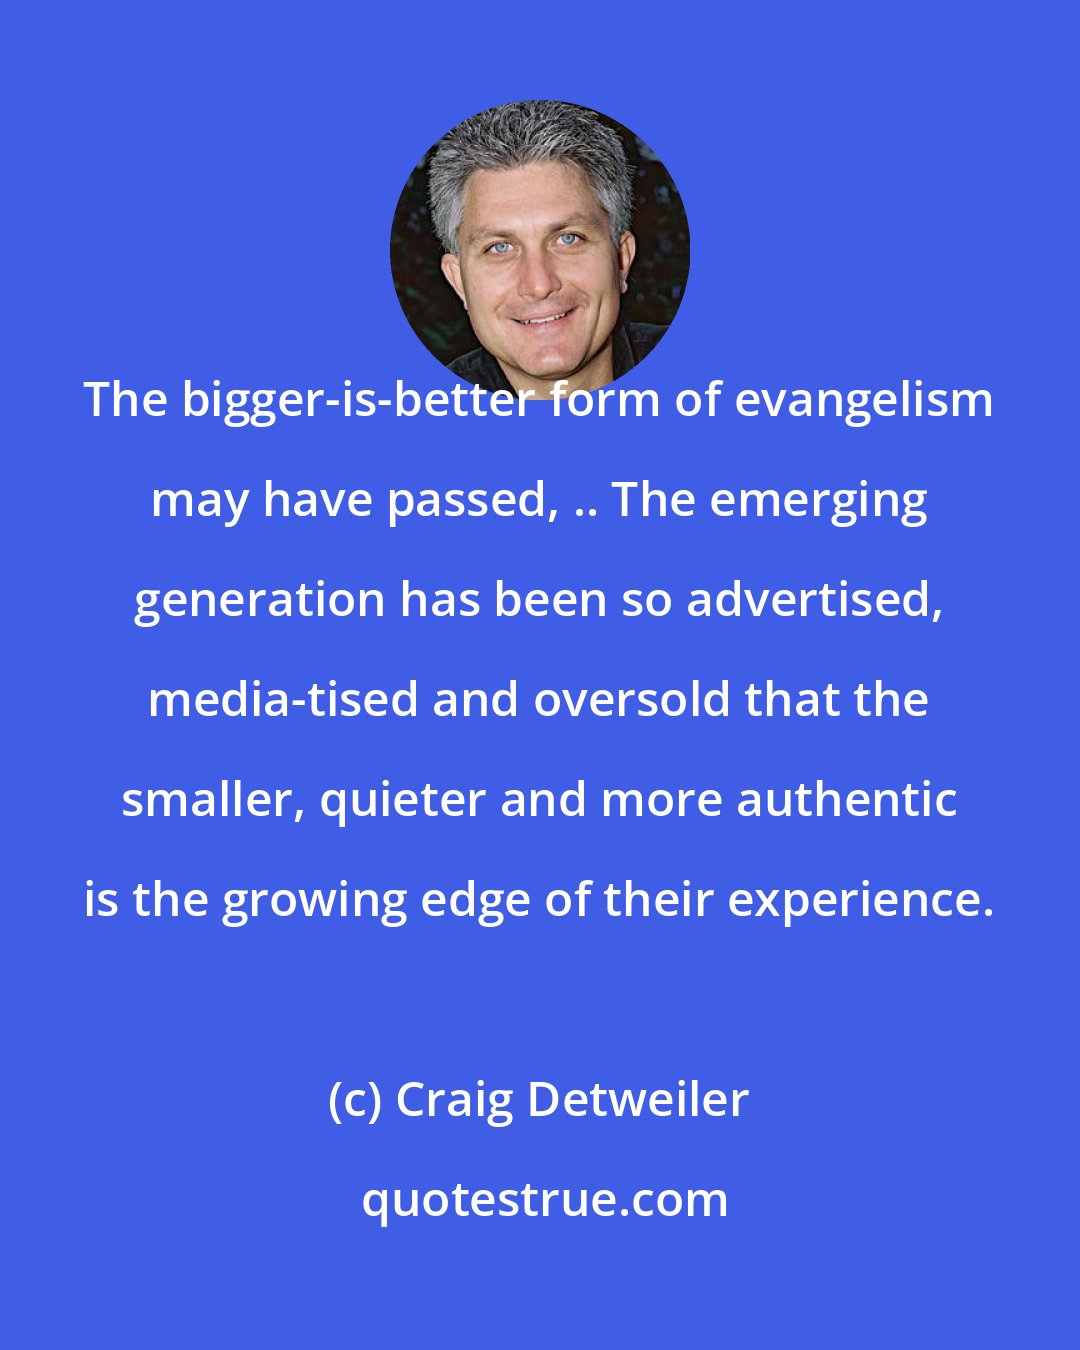 Craig Detweiler: The bigger-is-better form of evangelism may have passed, .. The emerging generation has been so advertised, media-tised and oversold that the smaller, quieter and more authentic is the growing edge of their experience.